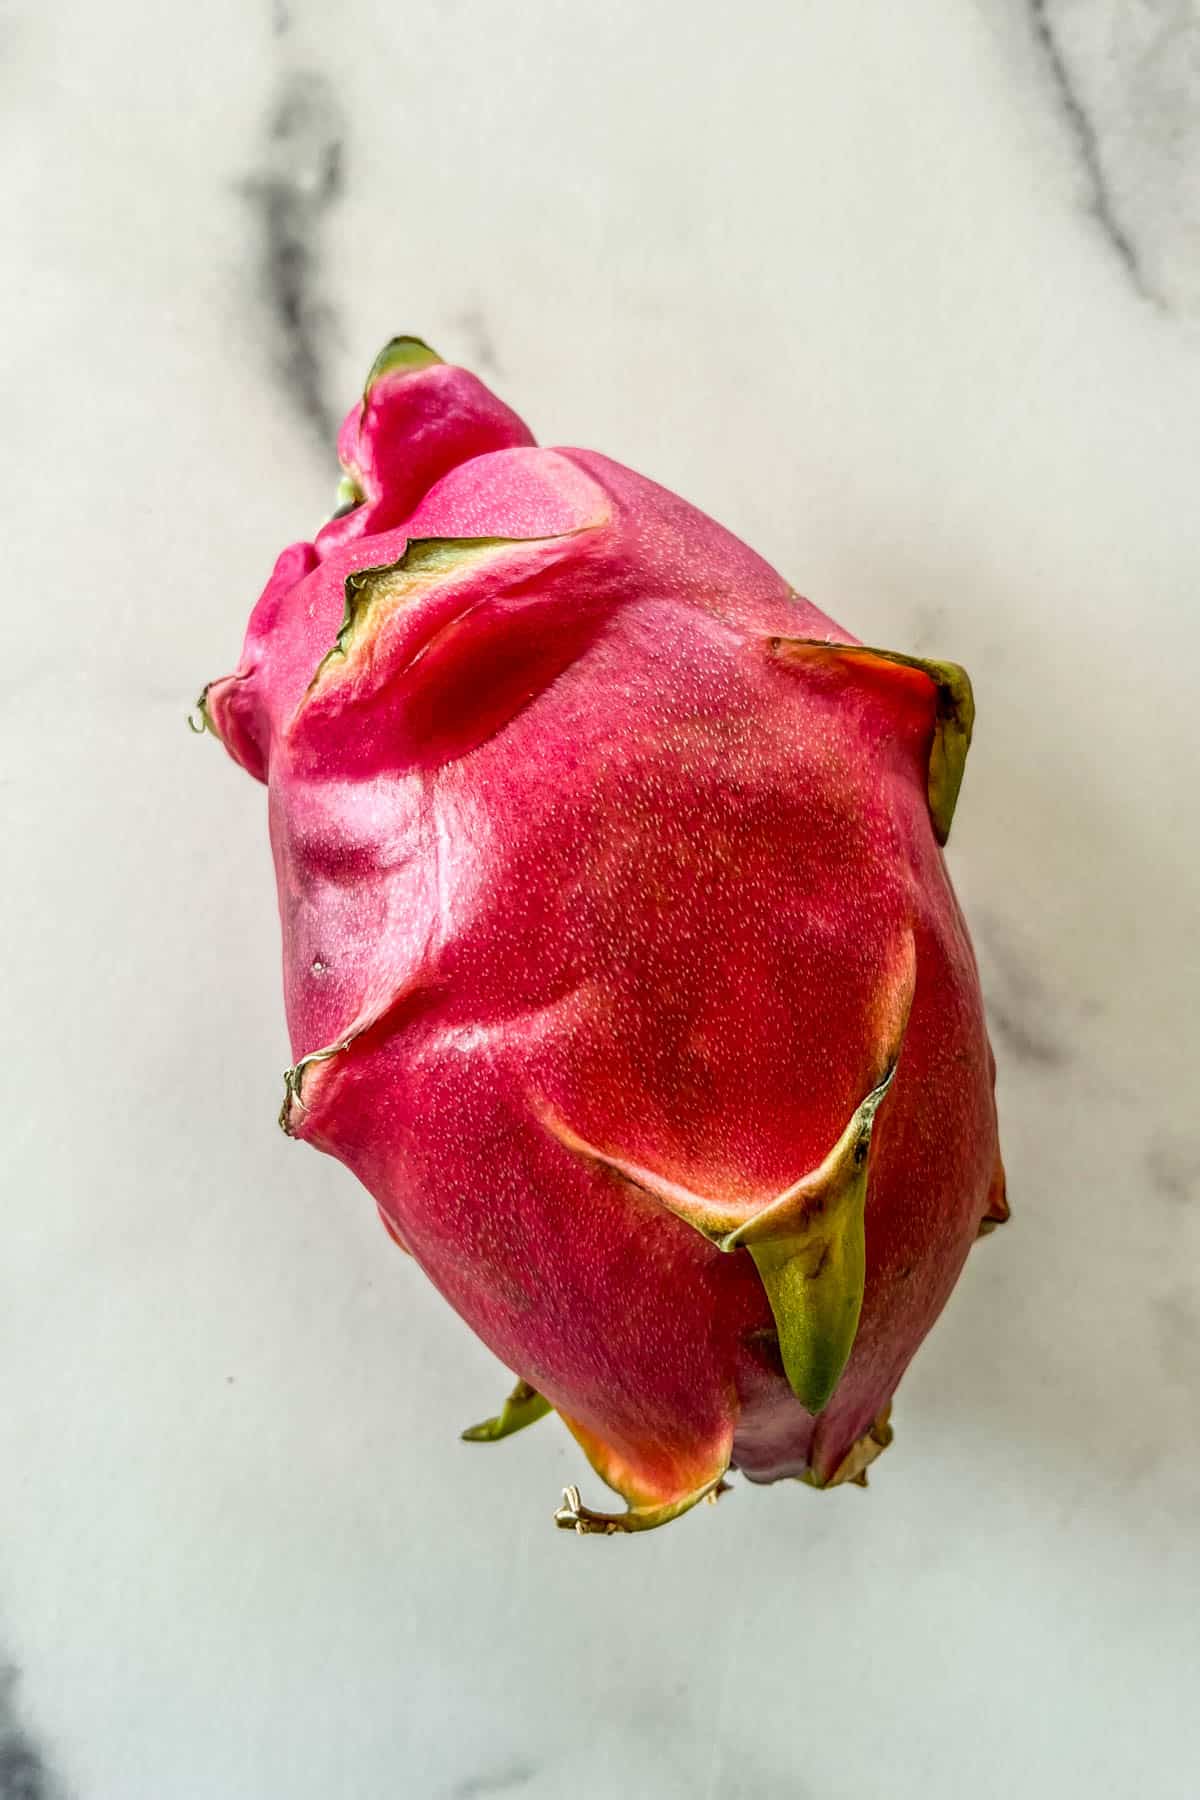 A pink dragon fruit on a marble background.